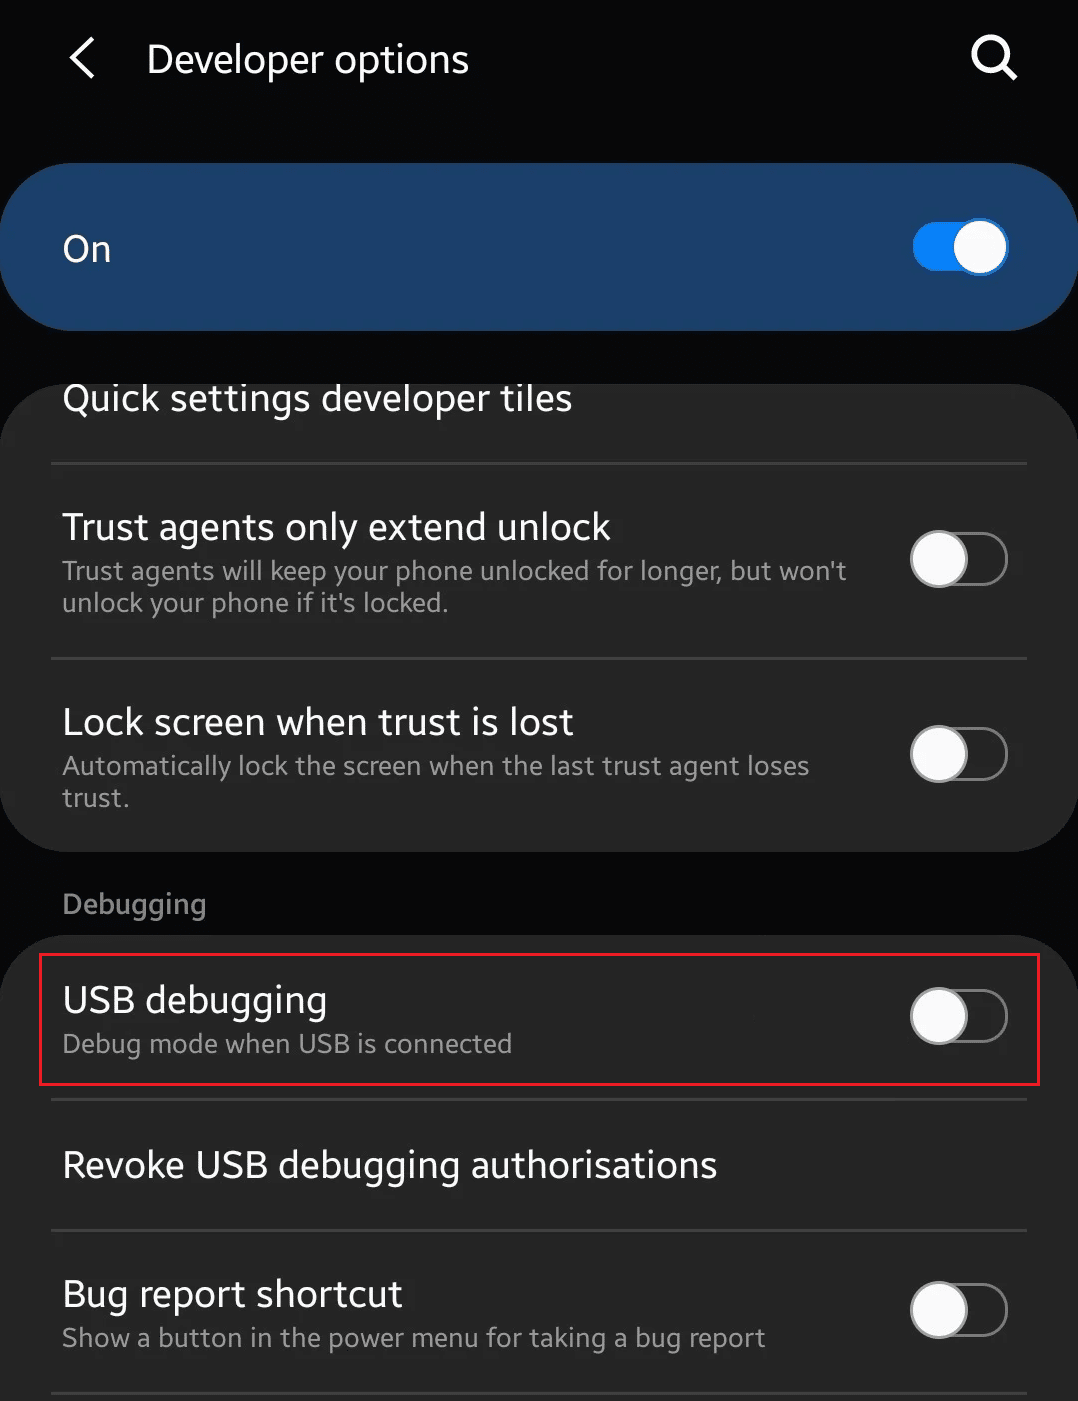 Swipe down and turn on the toggle for the USB debugging option to enable it